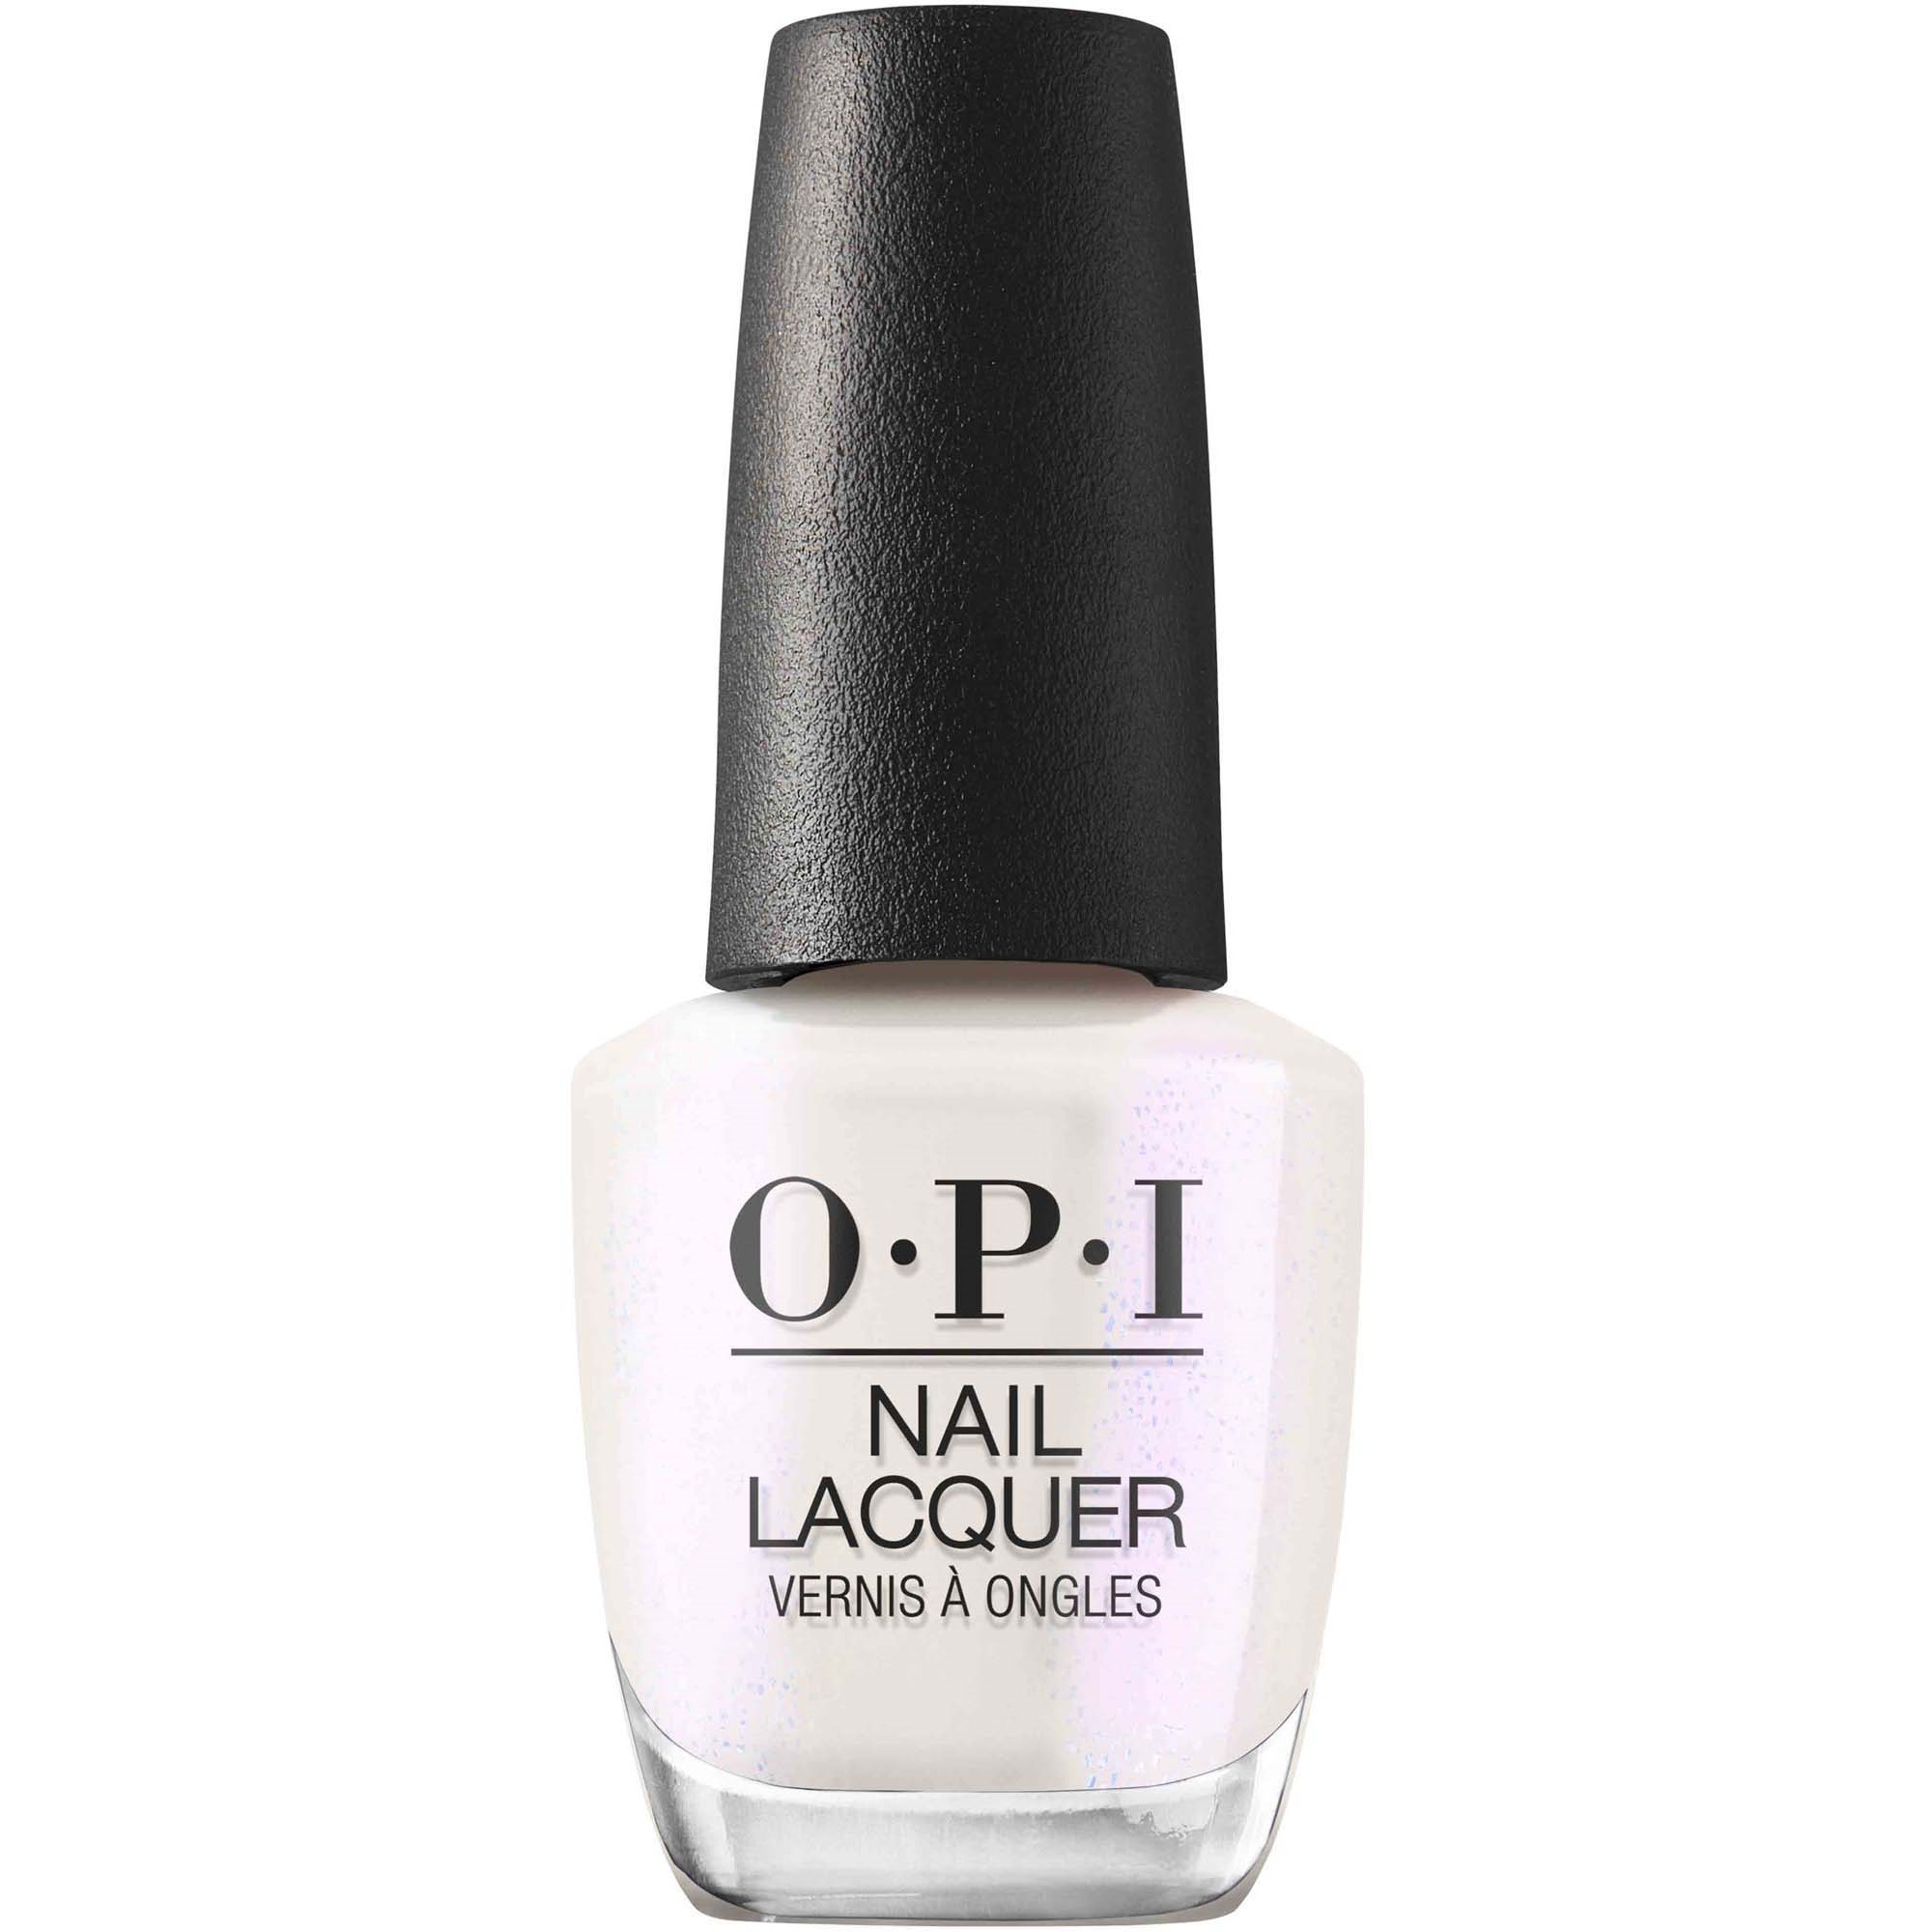 OPI Nail Lacquer Naughty & Nice Chill 